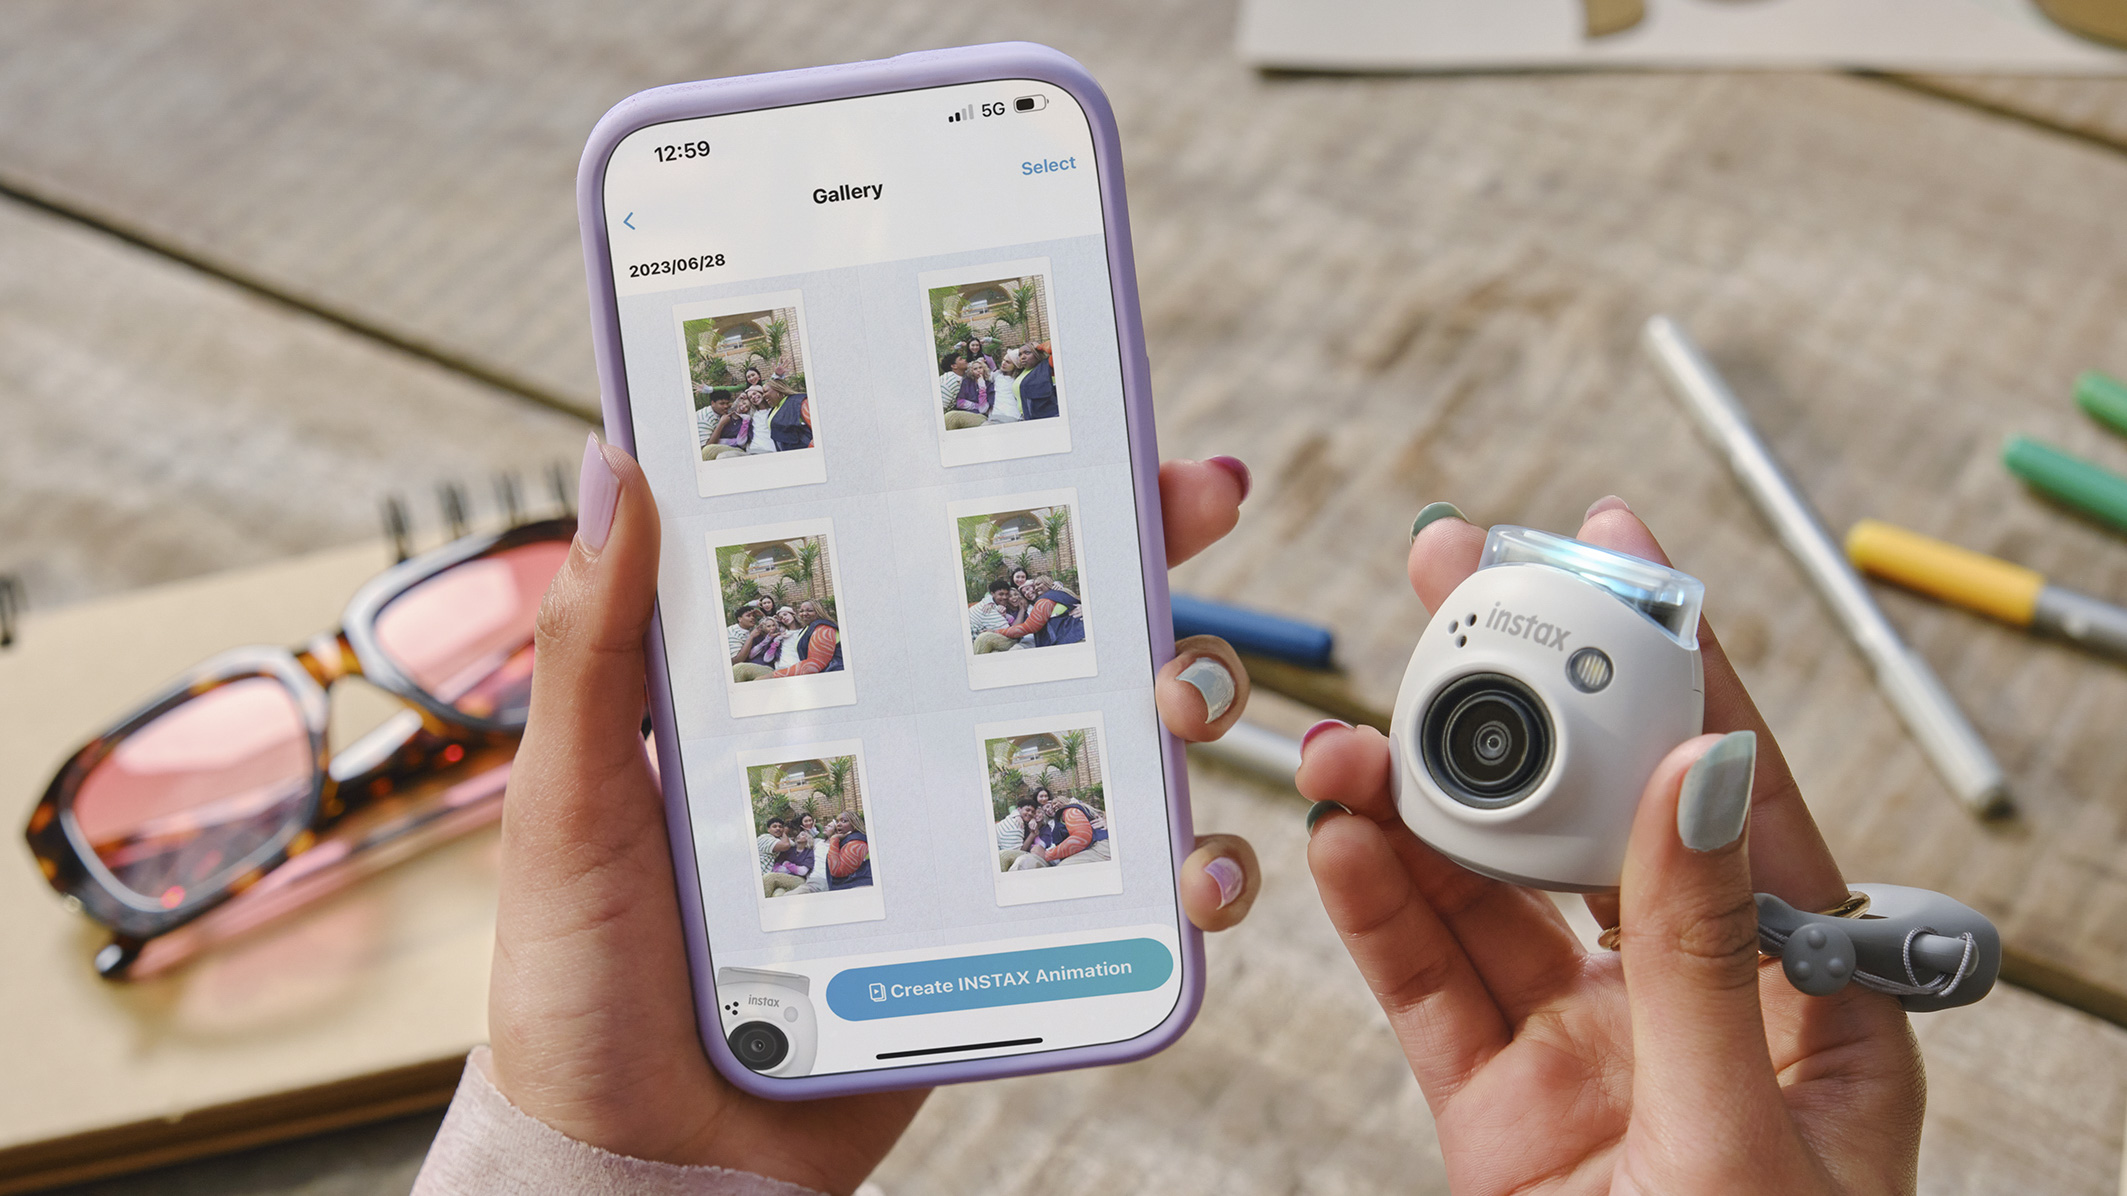 Fujifilm Instax Pal in the hand alongside a smartphone with the Instax Pal app on the phone's display